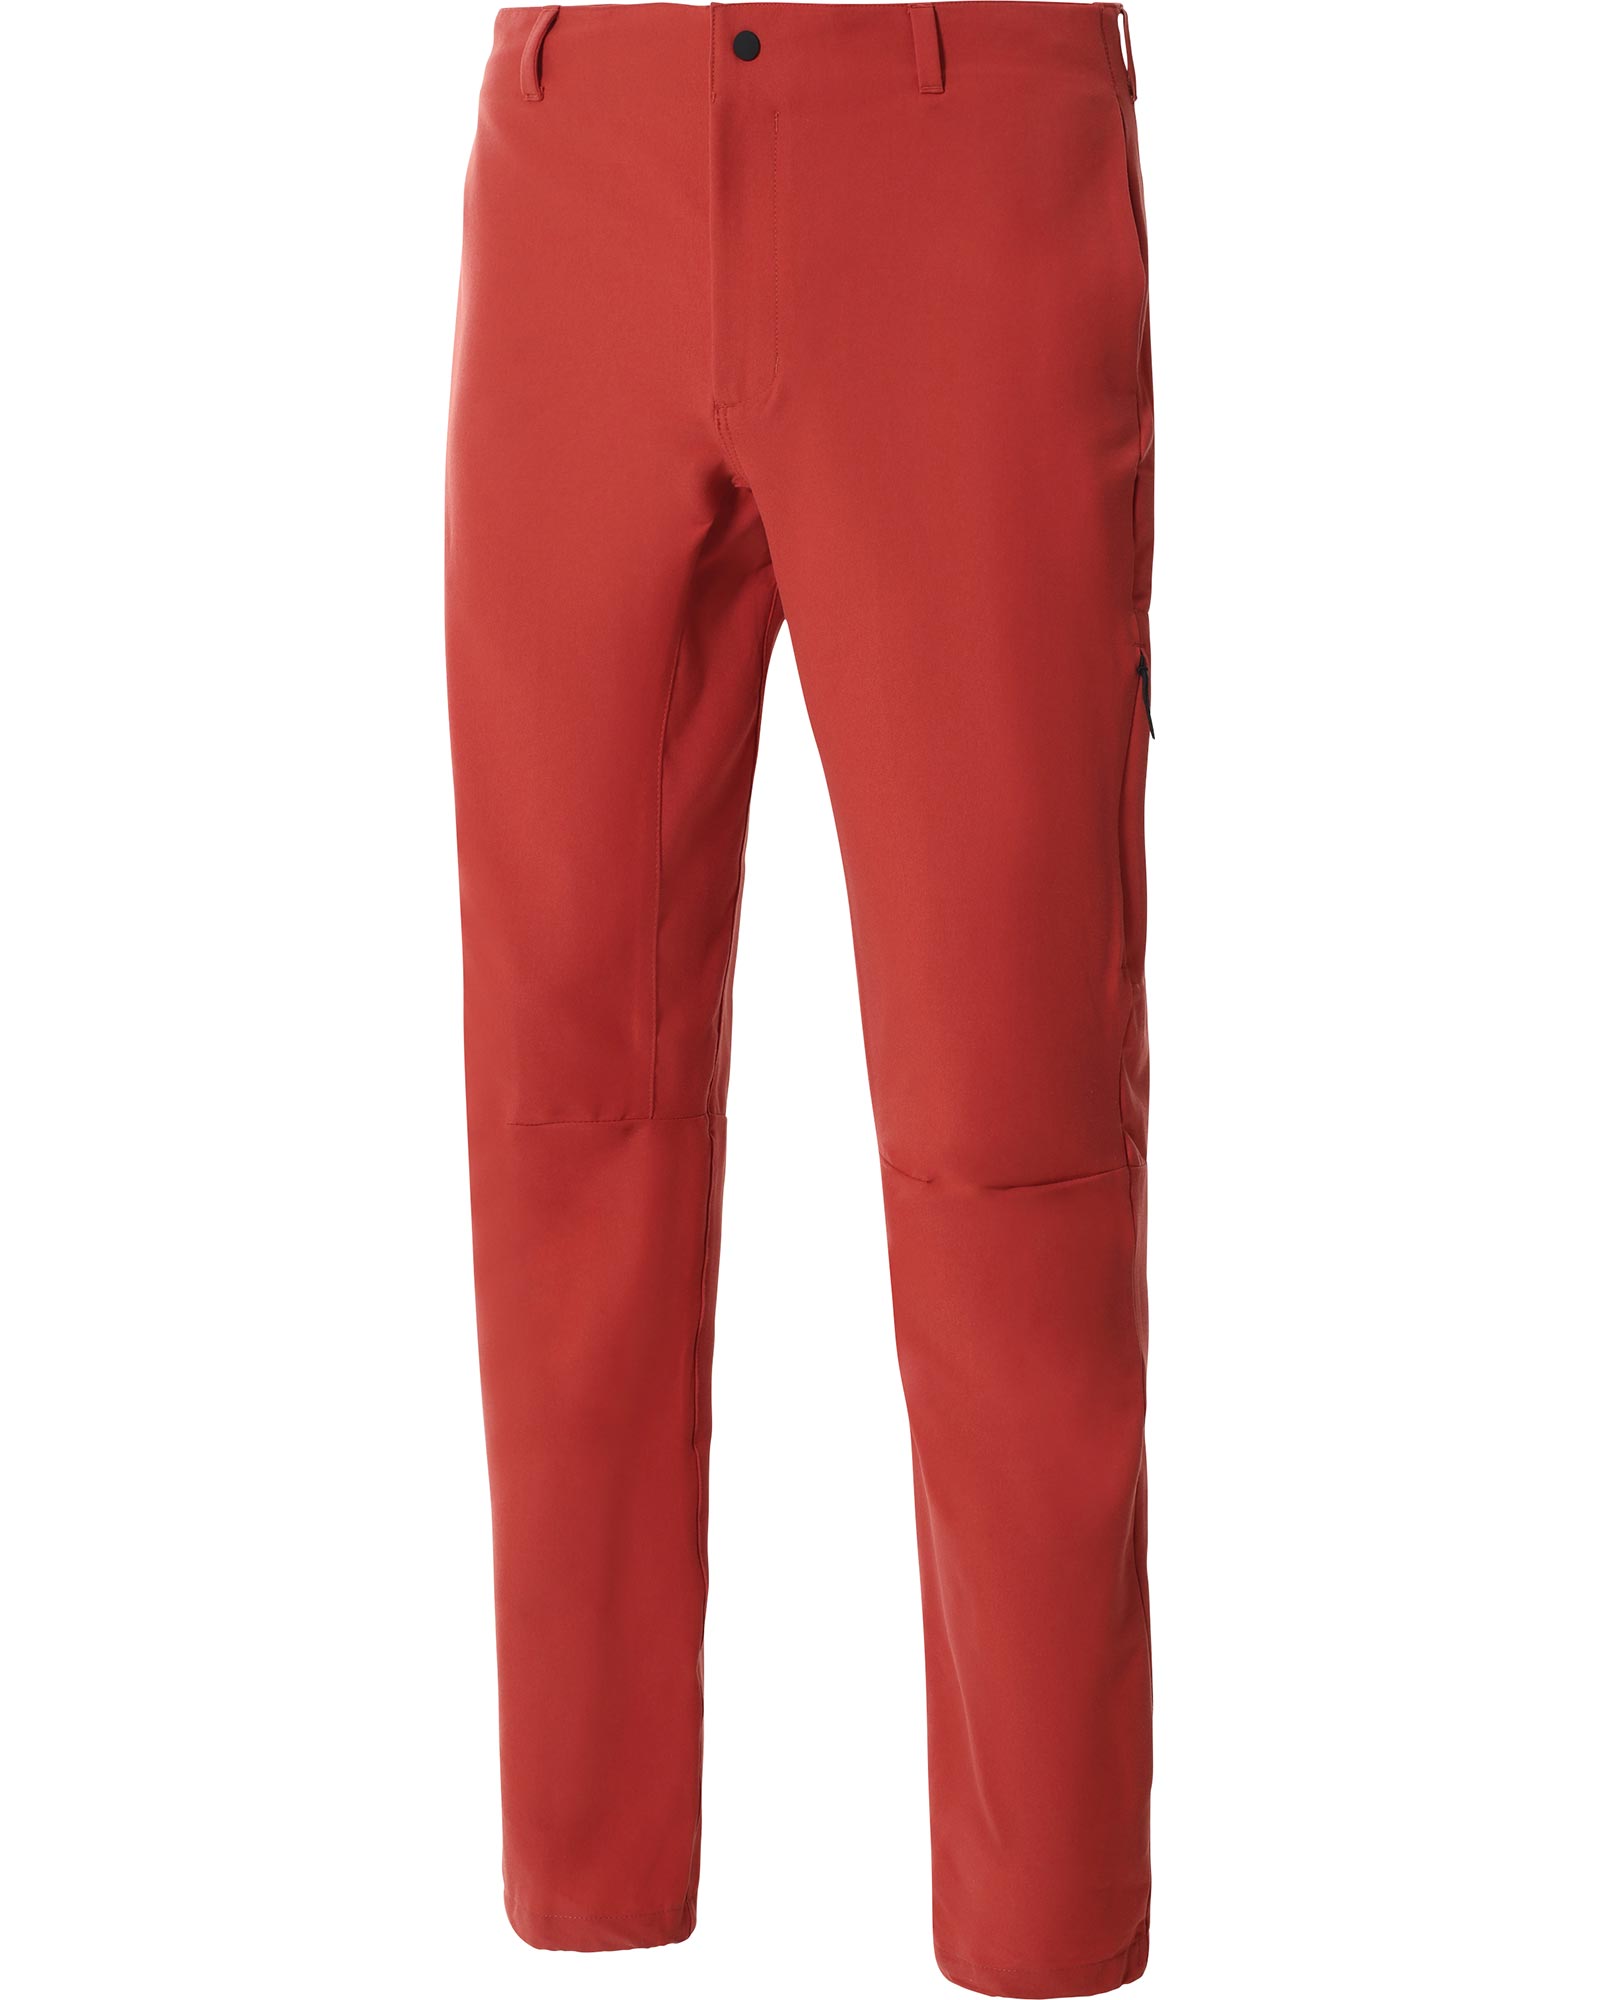 The North Face Project Men’s Pants - Tandori Spice Red 36"